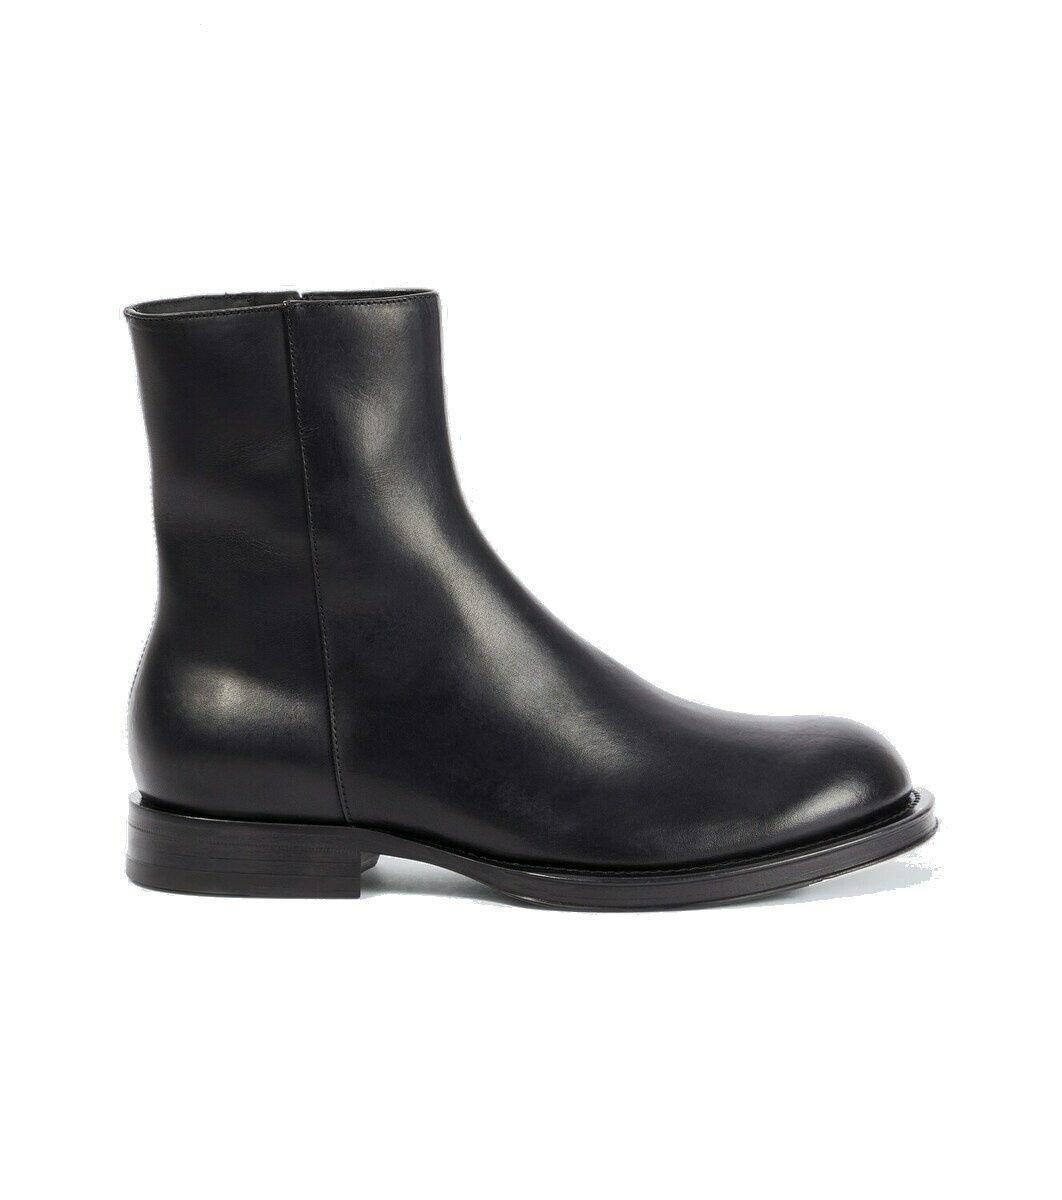 Photo: Lanvin Medley leather ankle boots